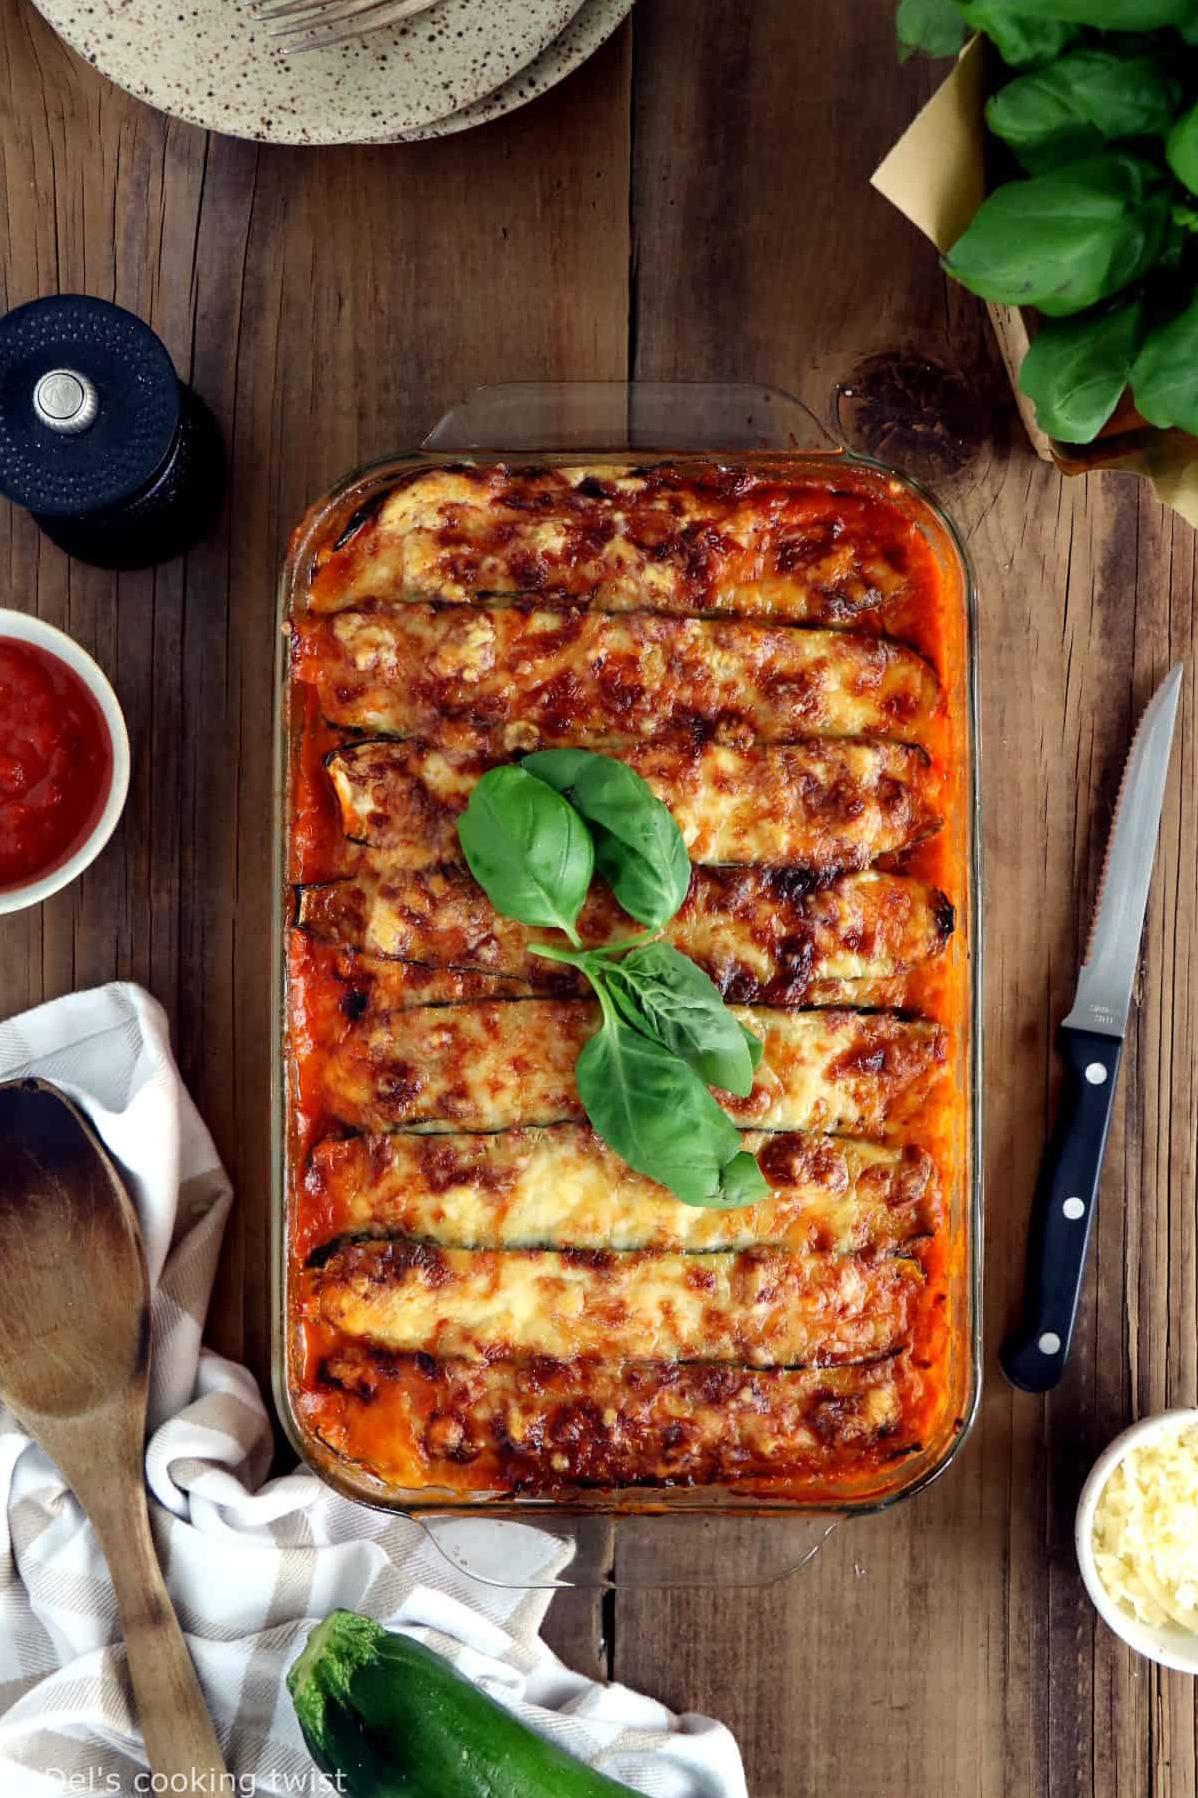  Let this classic Italian dish get a healthy makeover.